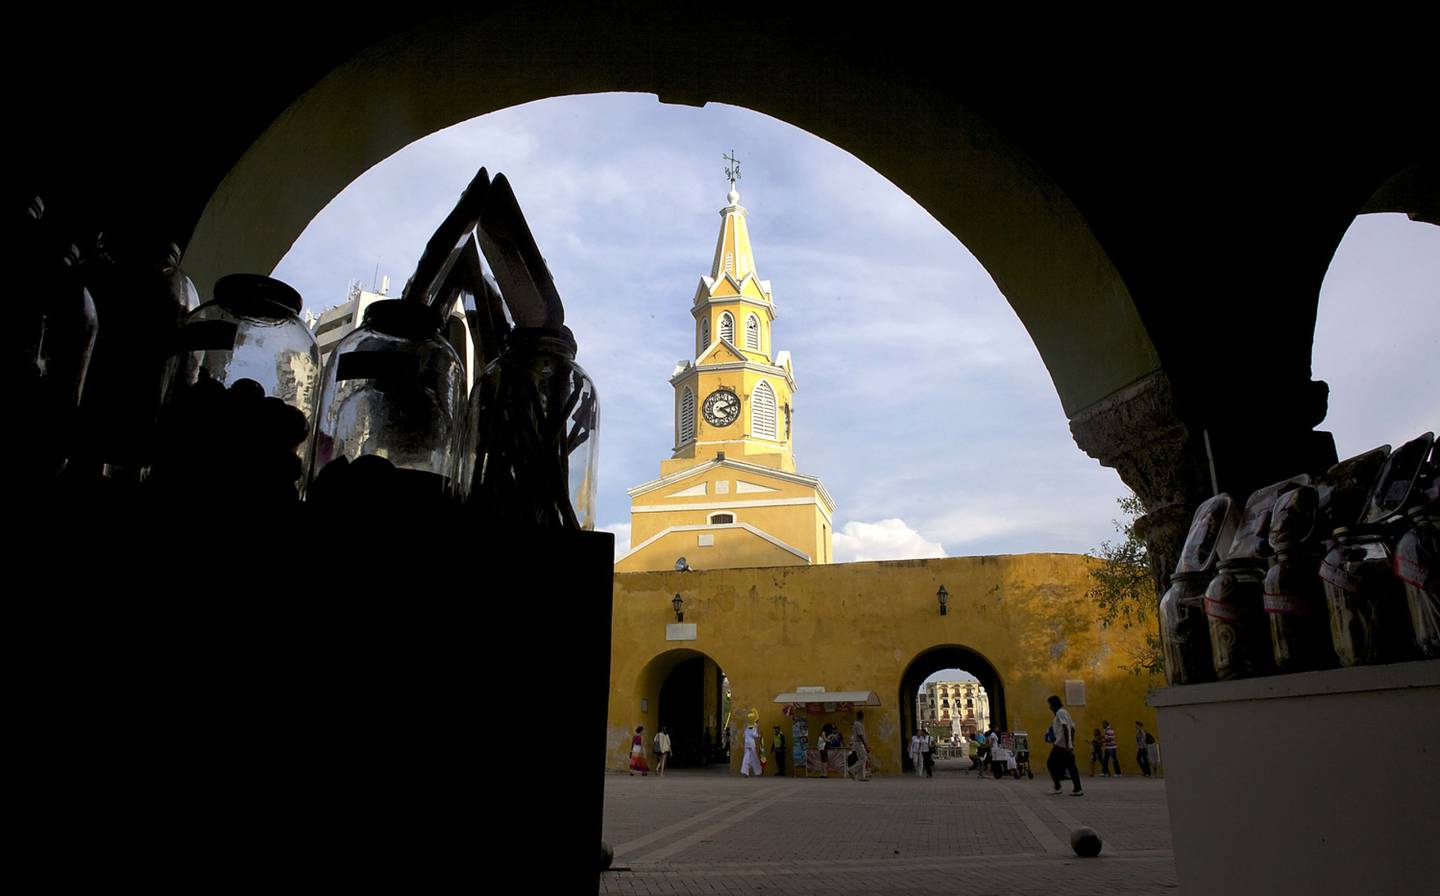 A clock tower stands in Cartagena, Colombia, on Wednesday, Nov. 9, 2011. Cartagena, the fifth-largest city in Colombia, is a center of economic activity in the Caribbean as well a popular tourist destination. Photographer: Paul Smith/Bloomberg